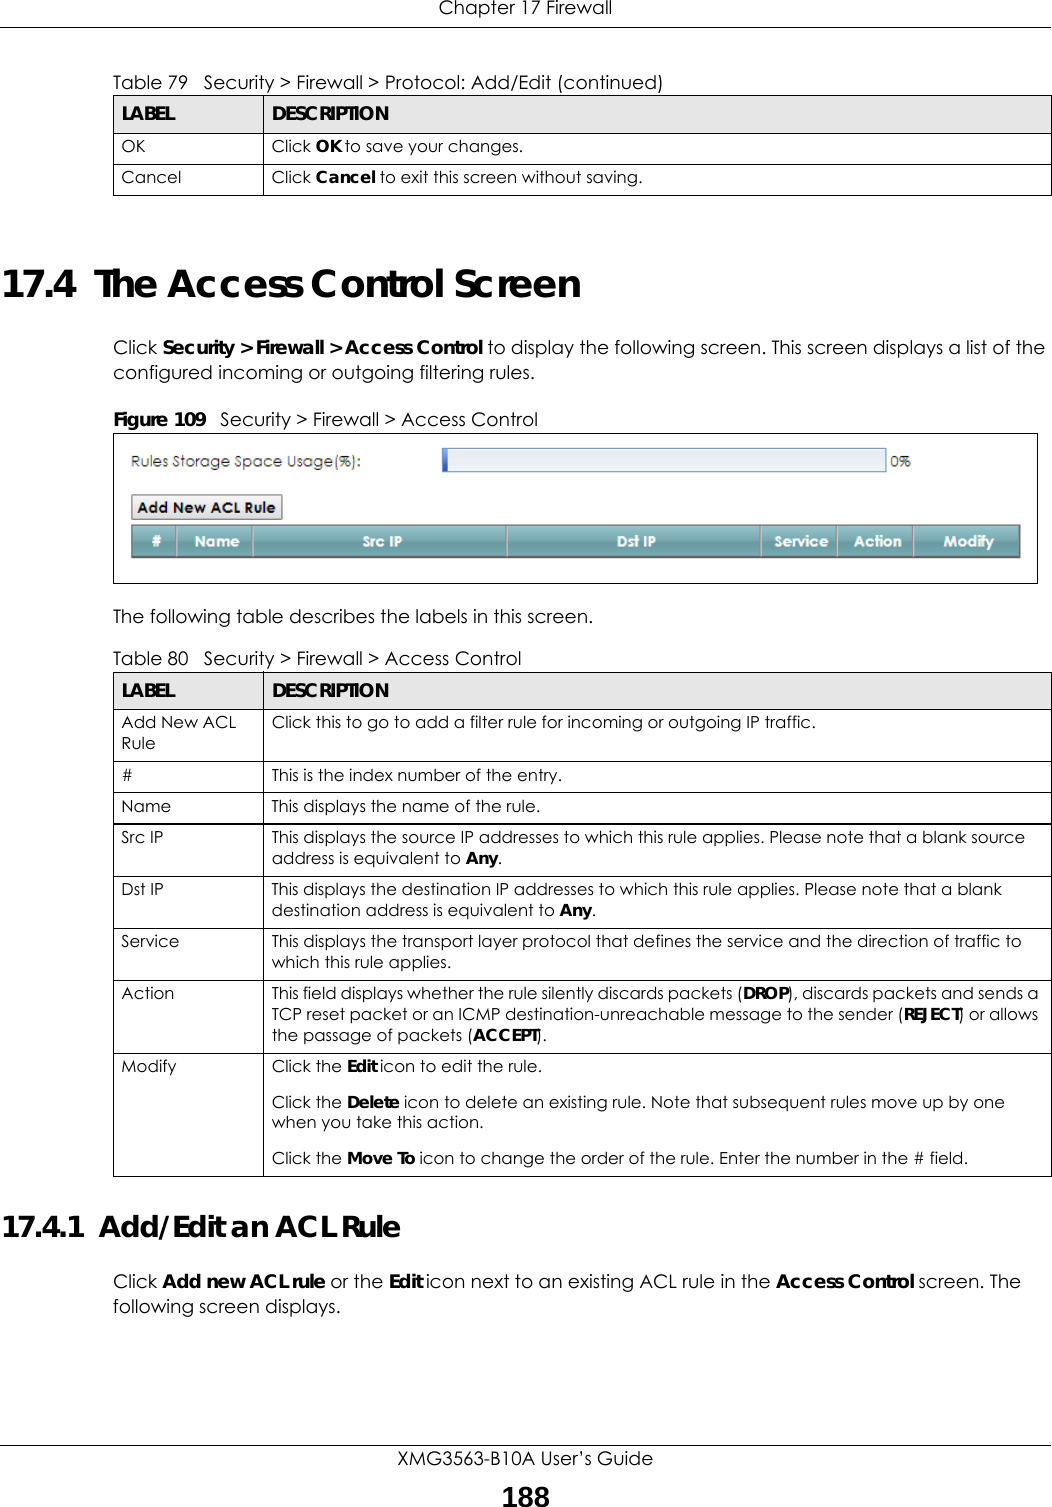 Chapter 17 FirewallXMG3563-B10A User’s Guide18817.4  The Access Control ScreenClick Security &gt; Firewall &gt; Access Control to display the following screen. This screen displays a list of the configured incoming or outgoing filtering rules. Figure 109   Security &gt; Firewall &gt; Access Control The following table describes the labels in this screen. 17.4.1  Add/Edit an ACL Rule   Click Add new ACL rule or the Edit icon next to an existing ACL rule in the Access Control screen. The following screen displays.OK Click OK to save your changes.Cancel Click Cancel to exit this screen without saving.Table 79   Security &gt; Firewall &gt; Protocol: Add/Edit (continued)LABEL DESCRIPTIONTable 80   Security &gt; Firewall &gt; Access ControlLABEL DESCRIPTIONAdd New ACL RuleClick this to go to add a filter rule for incoming or outgoing IP traffic.#This is the index number of the entry.Name This displays the name of the rule.Src IP  This displays the source IP addresses to which this rule applies. Please note that a blank source address is equivalent to Any.Dst IP This displays the destination IP addresses to which this rule applies. Please note that a blank destination address is equivalent to Any.Service This displays the transport layer protocol that defines the service and the direction of traffic to which this rule applies. Action This field displays whether the rule silently discards packets (DROP), discards packets and sends a TCP reset packet or an ICMP destination-unreachable message to the sender (REJECT) or allows the passage of packets (ACCEPT).Modify Click the Edit icon to edit the rule.Click the Delete icon to delete an existing rule. Note that subsequent rules move up by one when you take this action.Click the Move To icon to change the order of the rule. Enter the number in the # field.